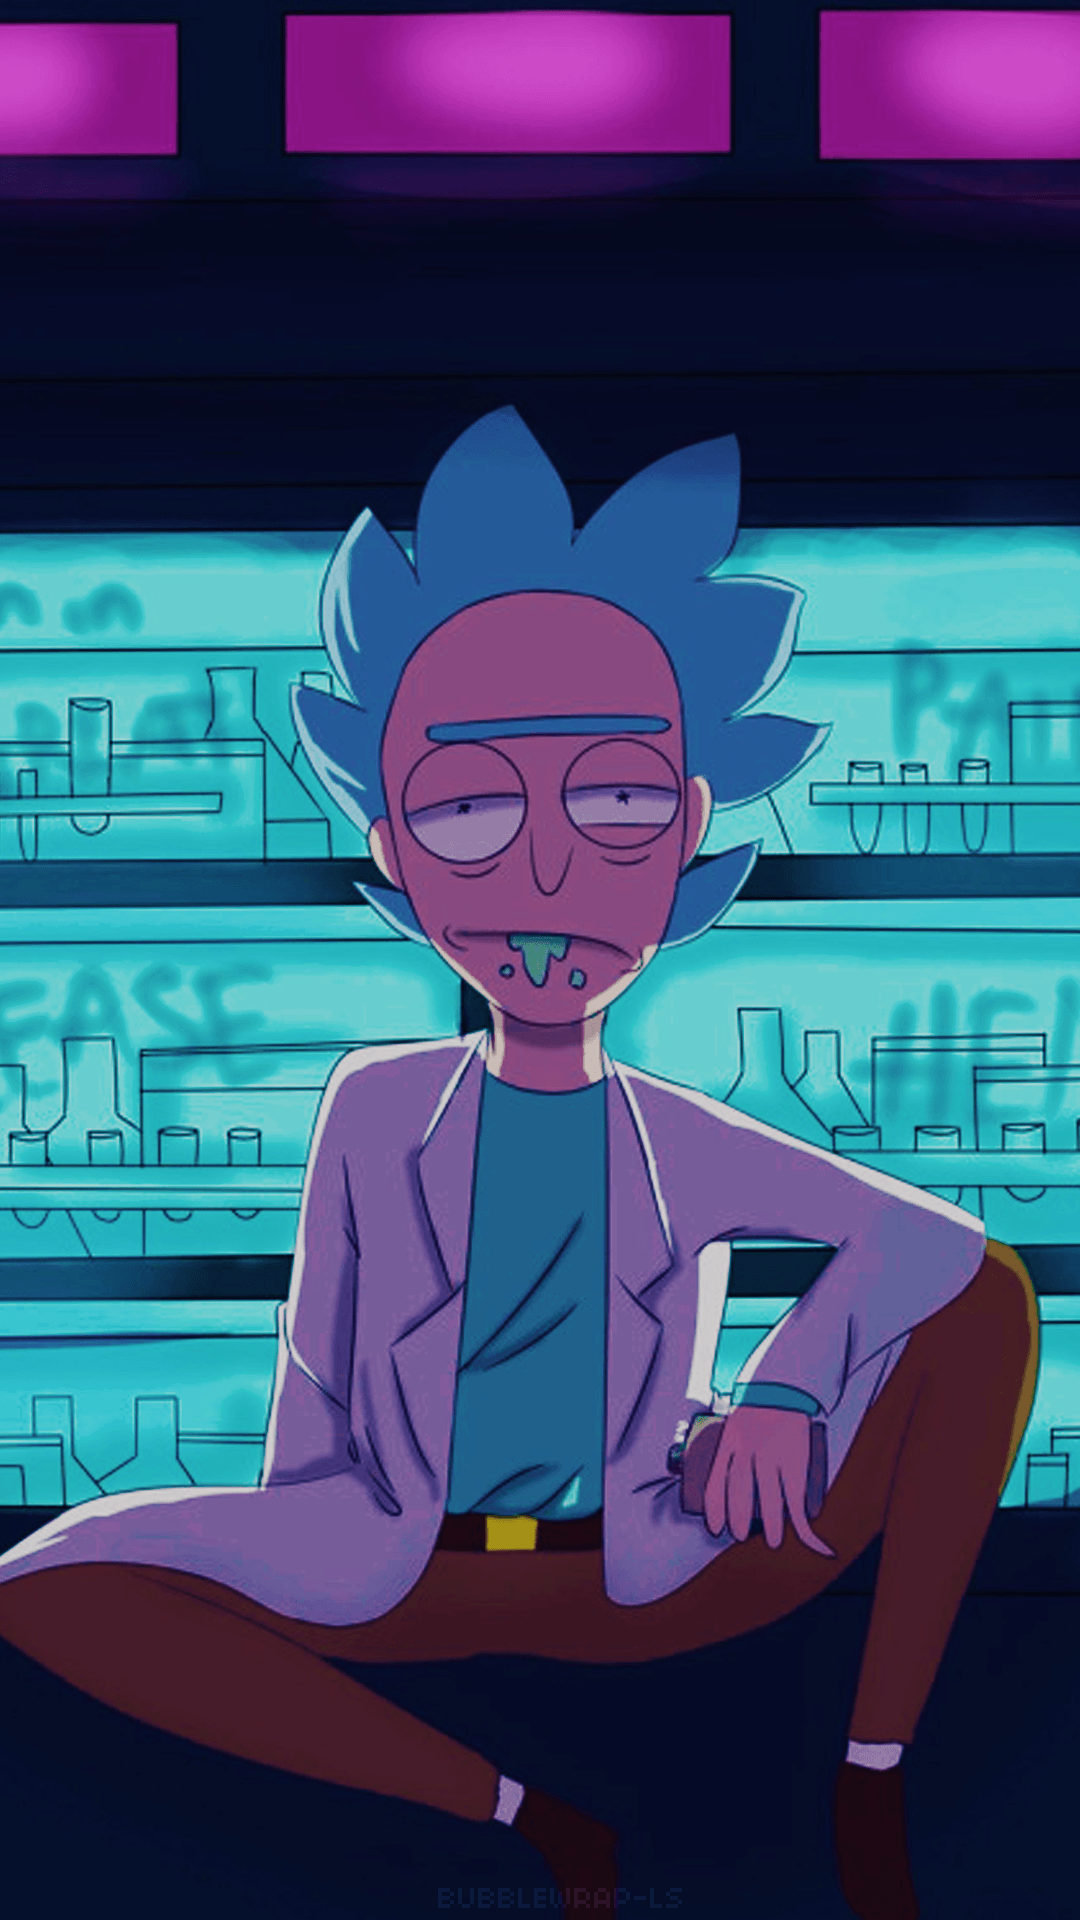 Rick And Morty Aesthetic Wallpapers Top Free Rick And Morty Aesthetic Backgrounds 2837